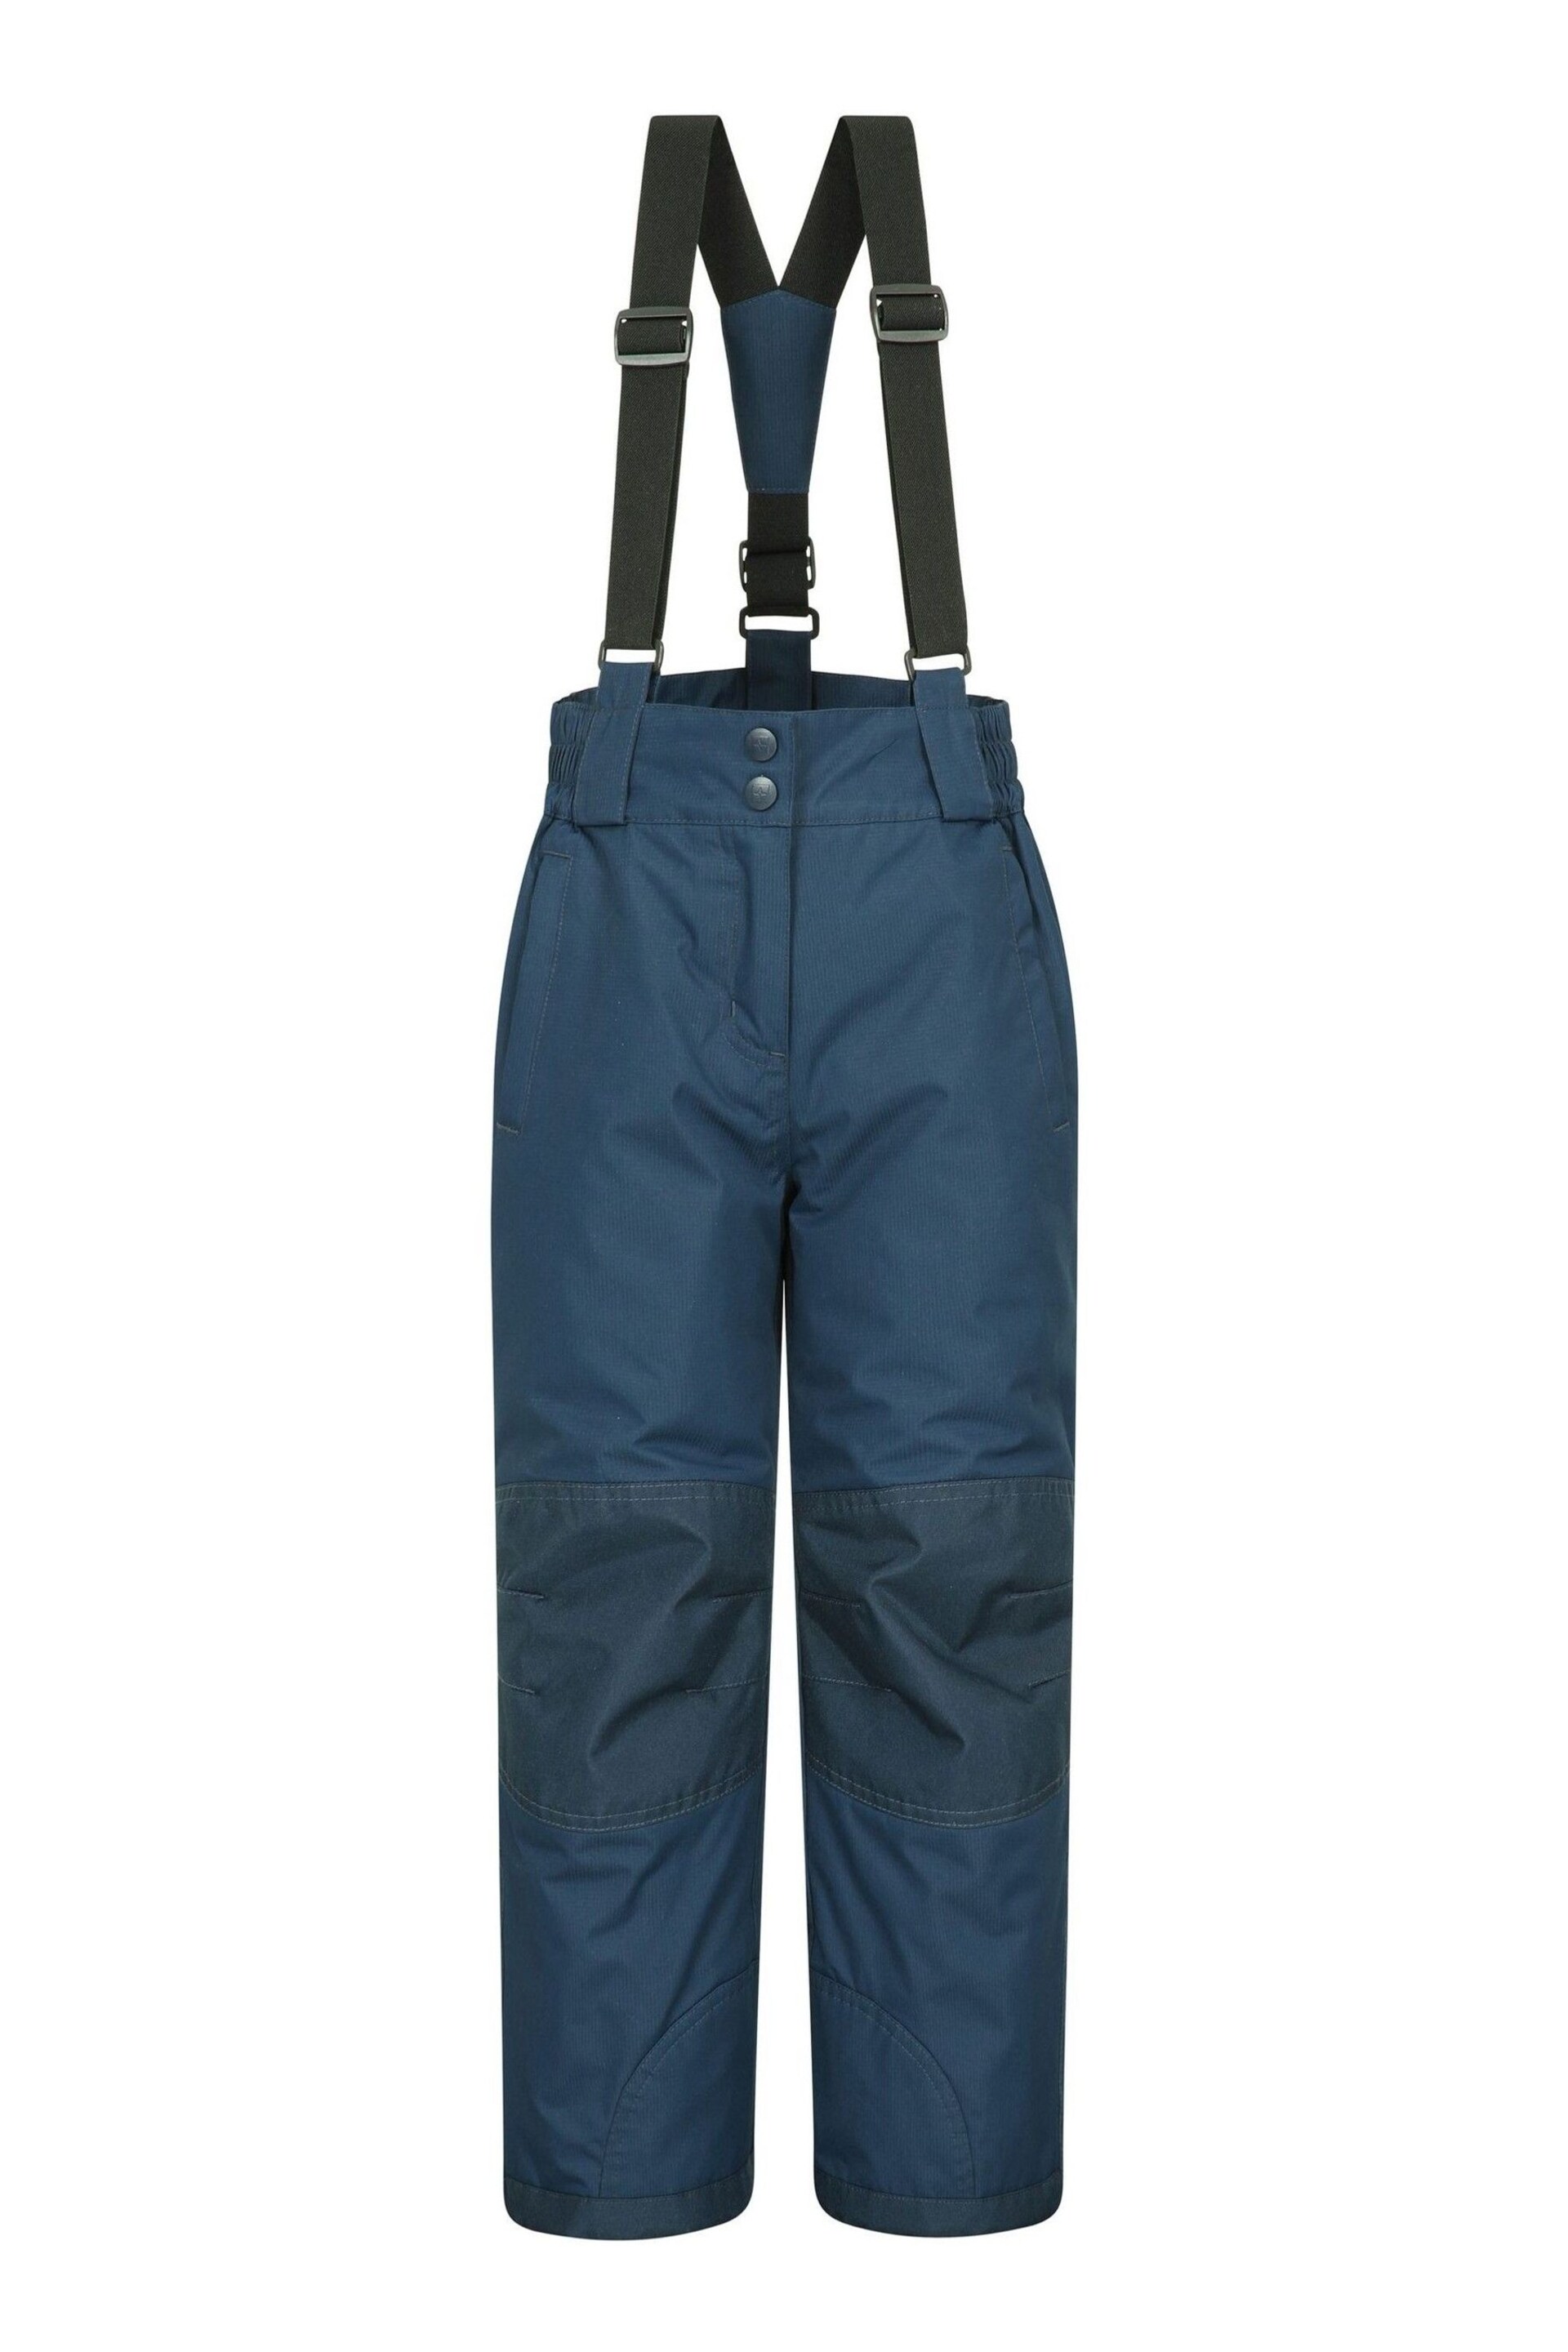 Mountain Warehouse Blue Raptor Kids Snow Trousers - Image 1 of 5